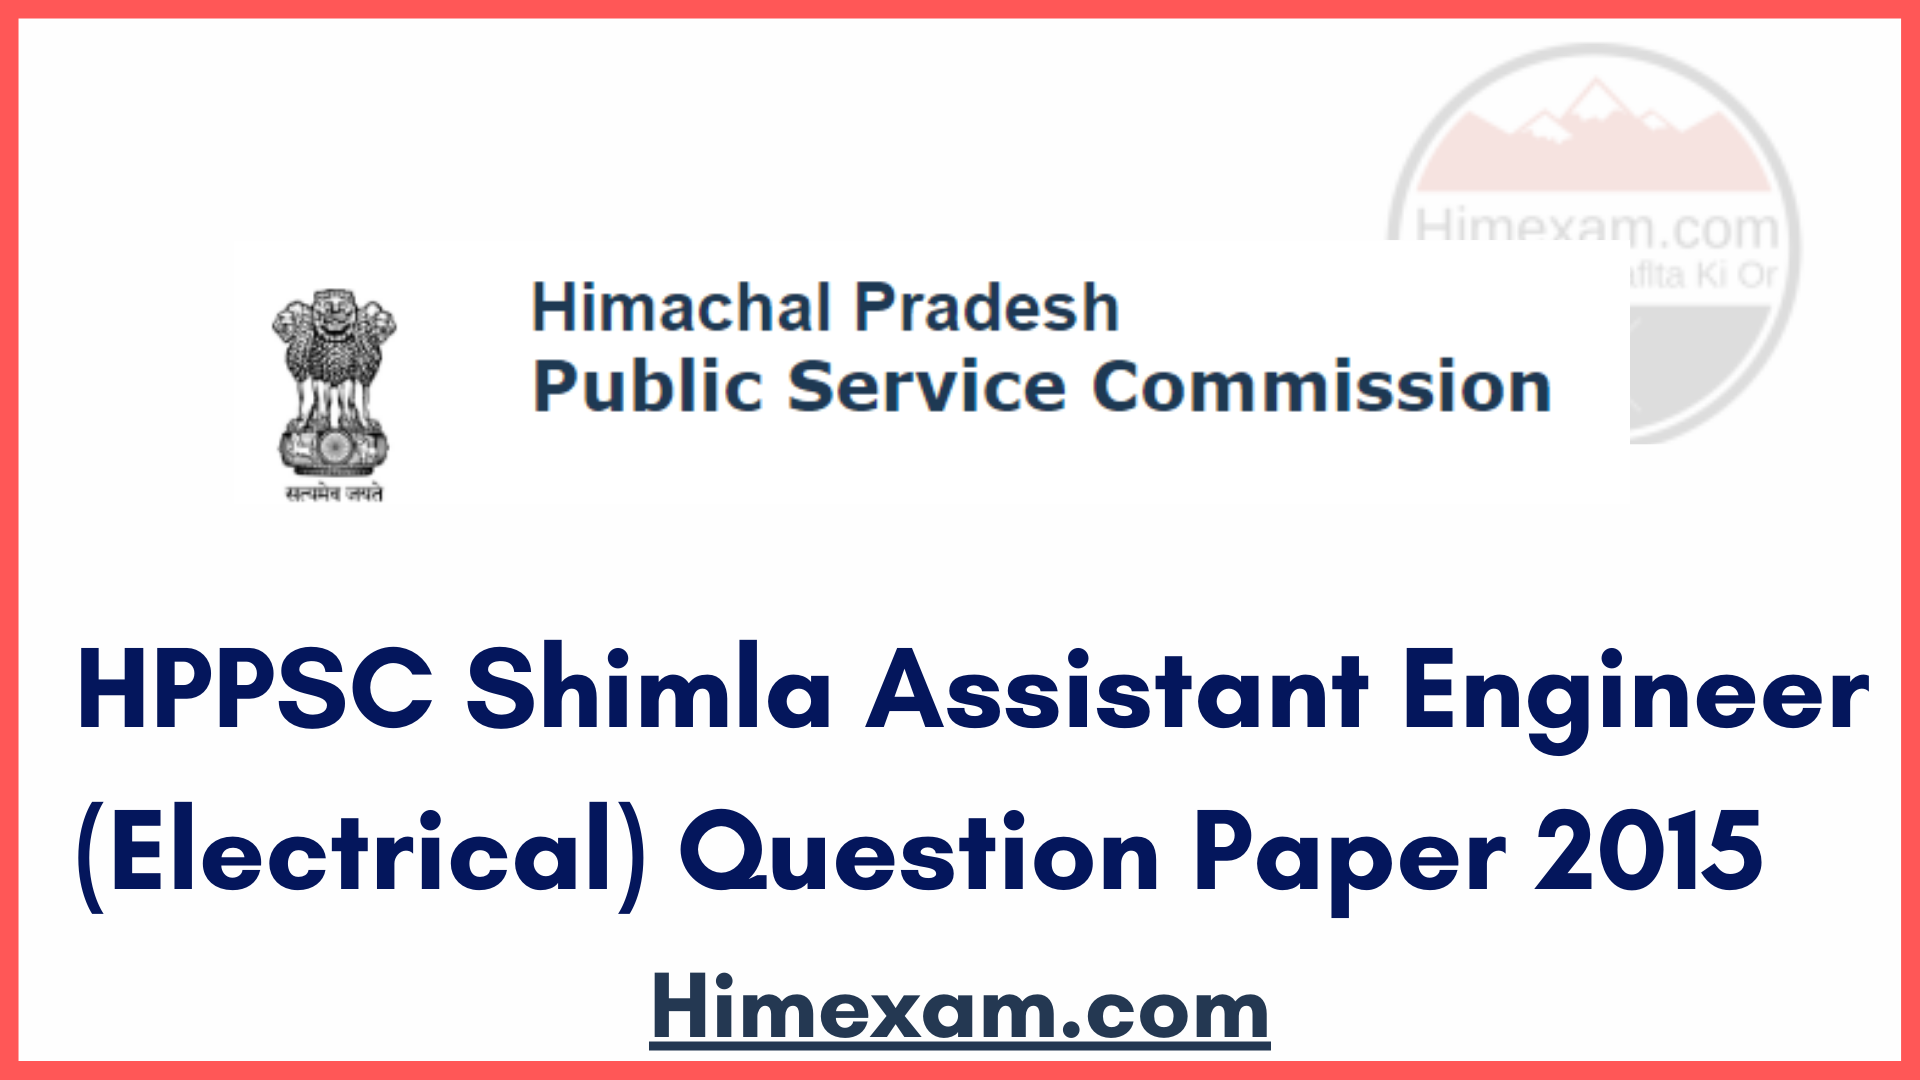 HPPSC Shimla Assistant Engineer (Electrical) Question Paper 2015